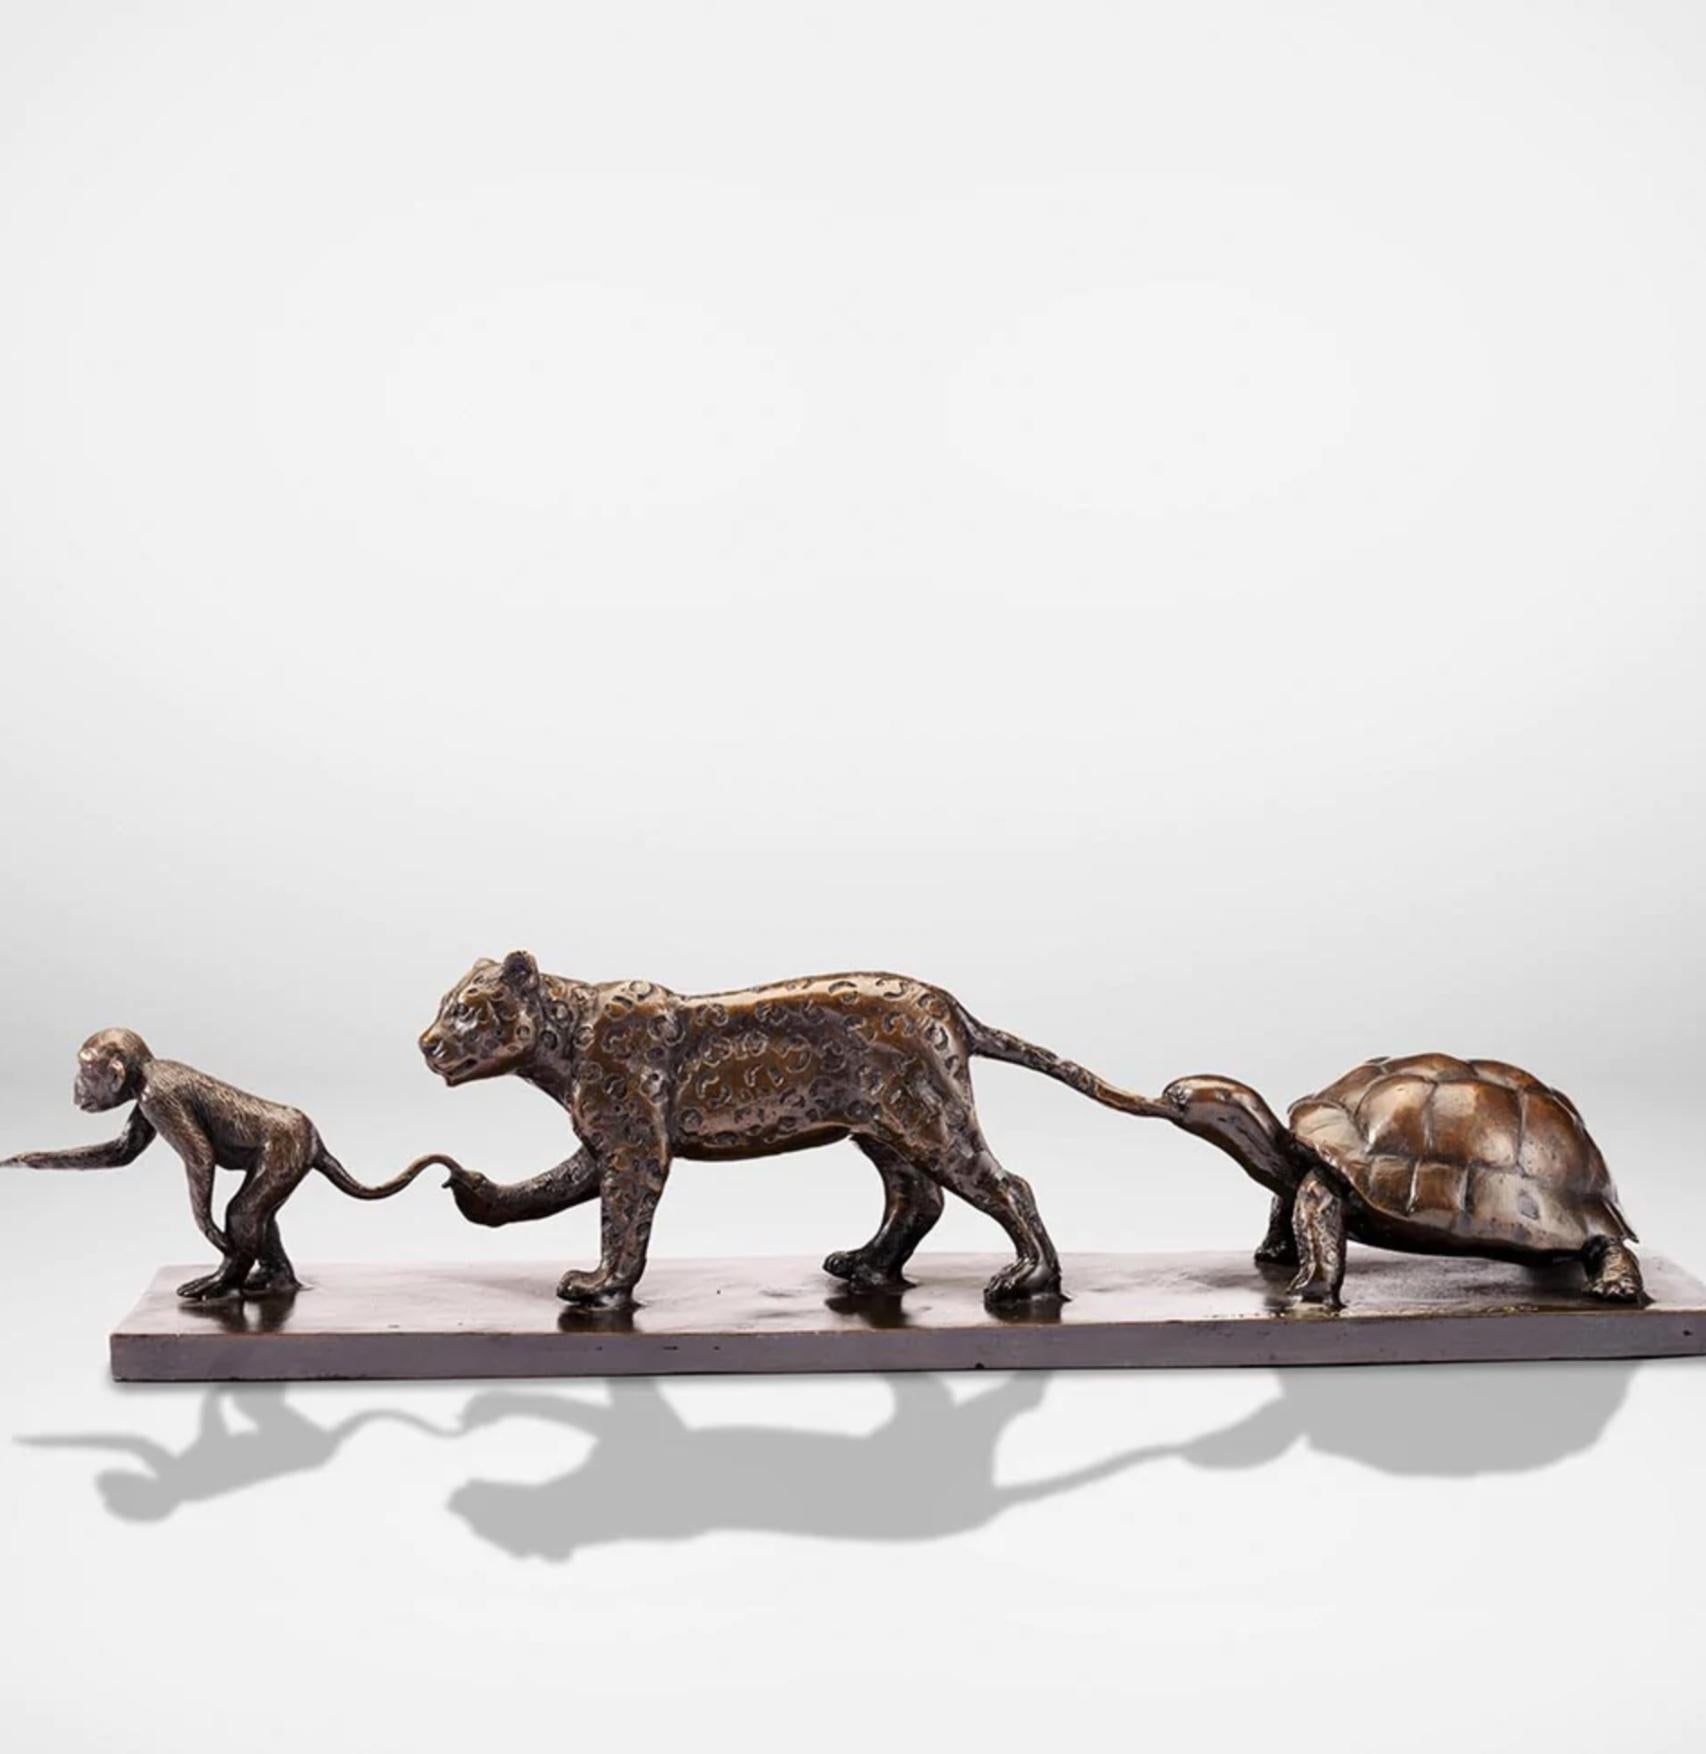 Authentic Bronze Love The Monkey, Jaguar, Tortoise Sculpture by Gillie and Marc - Art by Gillie and Marc Schattner